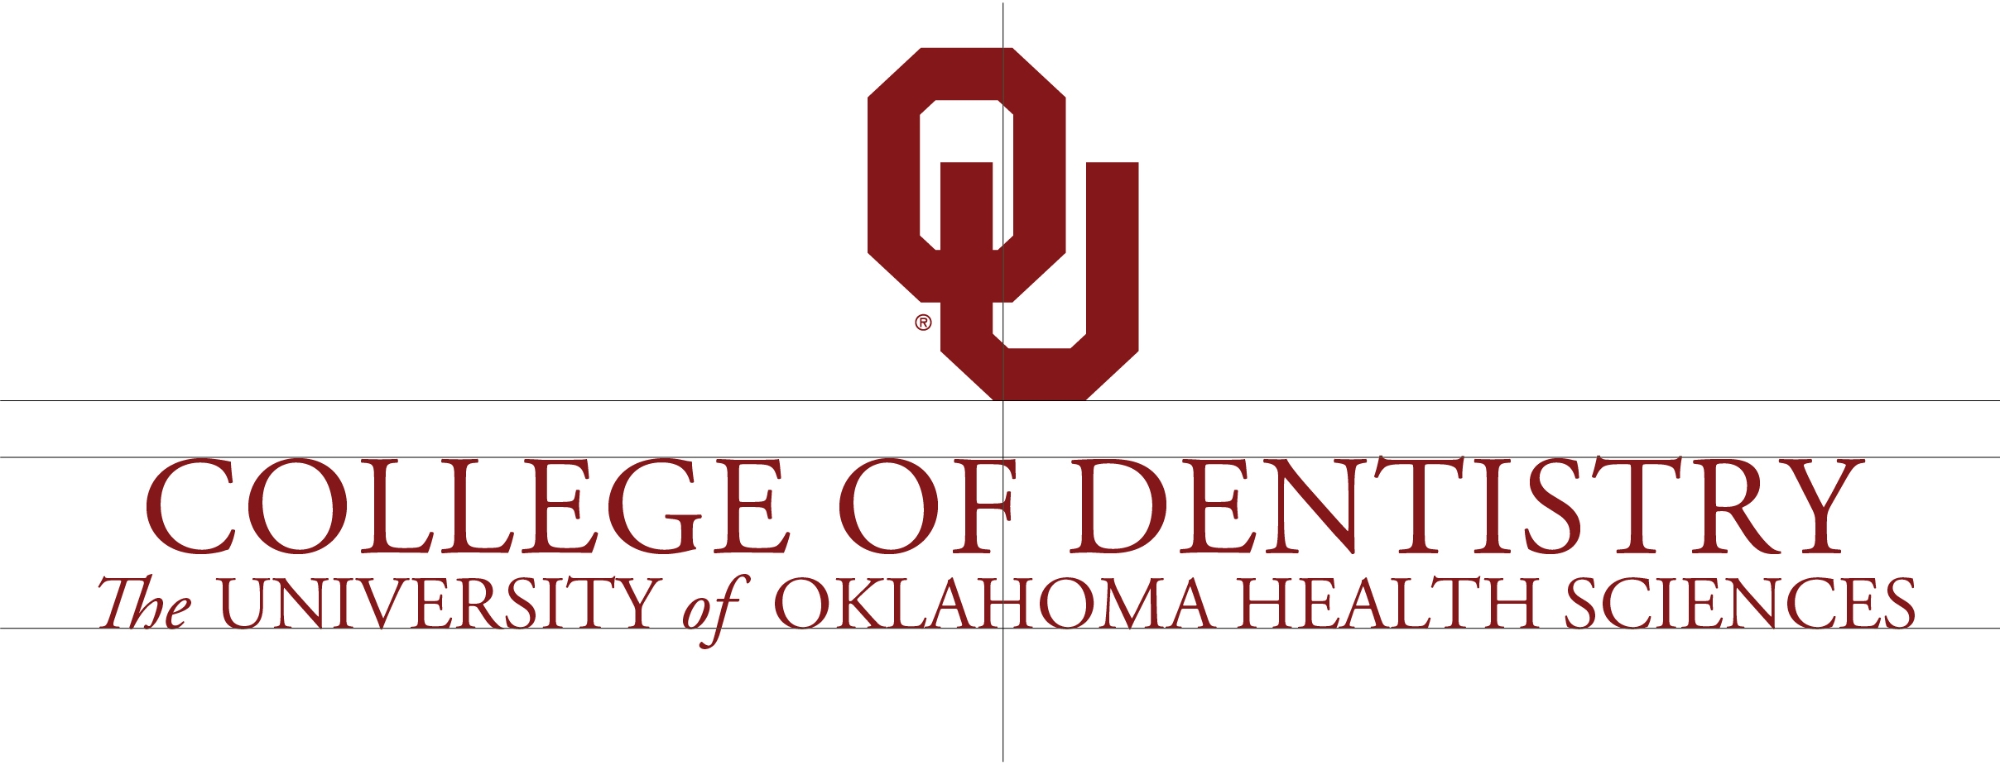 Interlocking OU, College of Dentistry, The University of Oklahoma Health Sciences wordmark, two-line example.